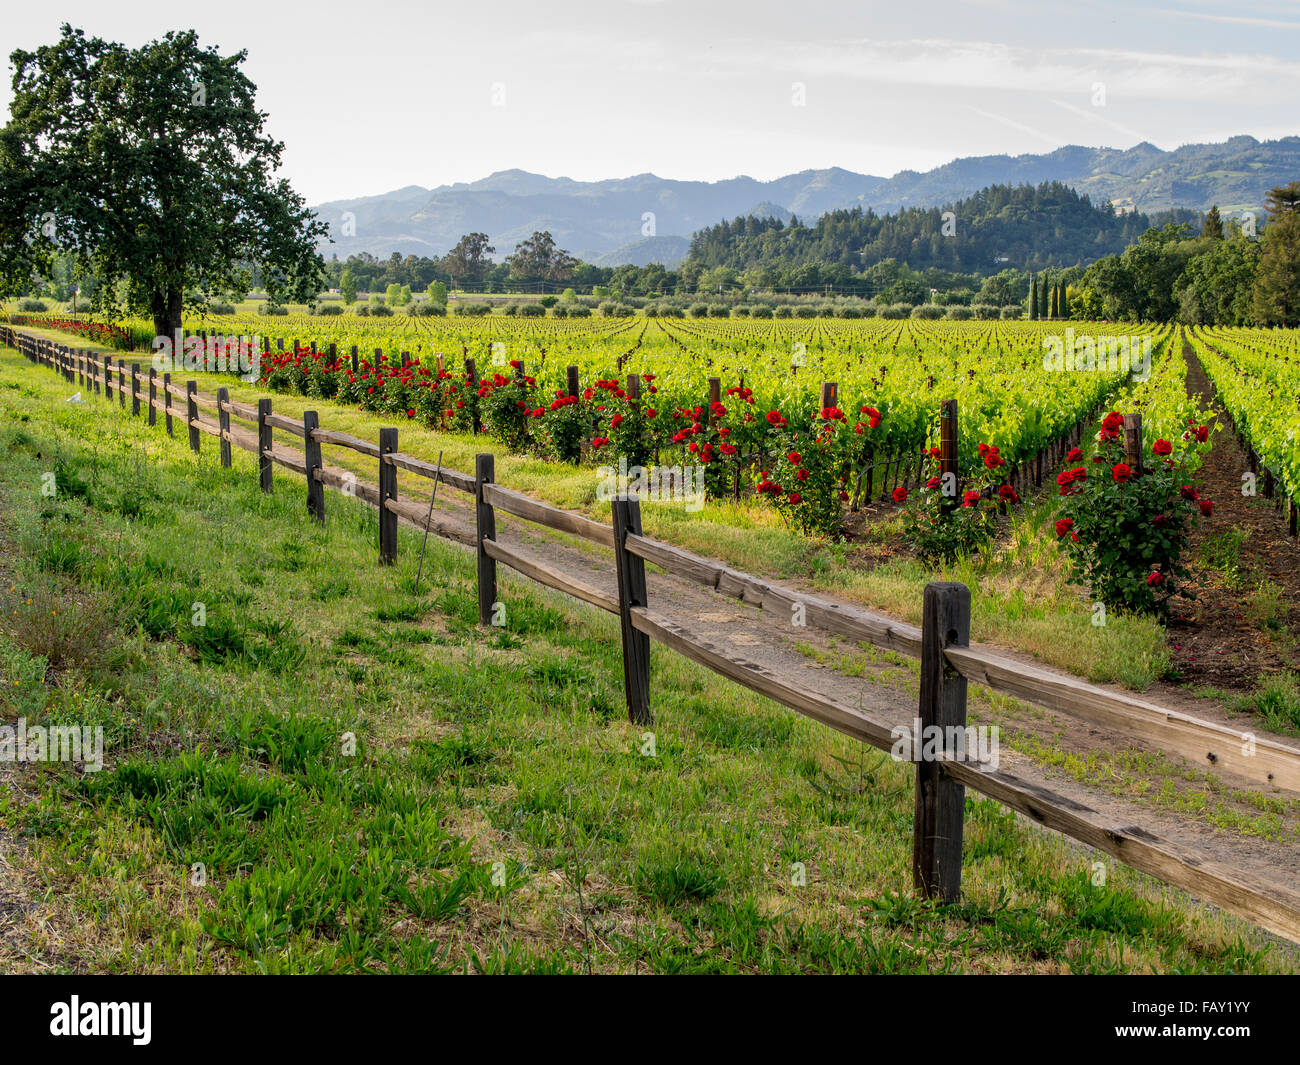 CALISTOGA, USA - MAY 3, 2014: Rustic fence & red roses frame a vineyard along Highway 128 in California's wine country. Stock Photo